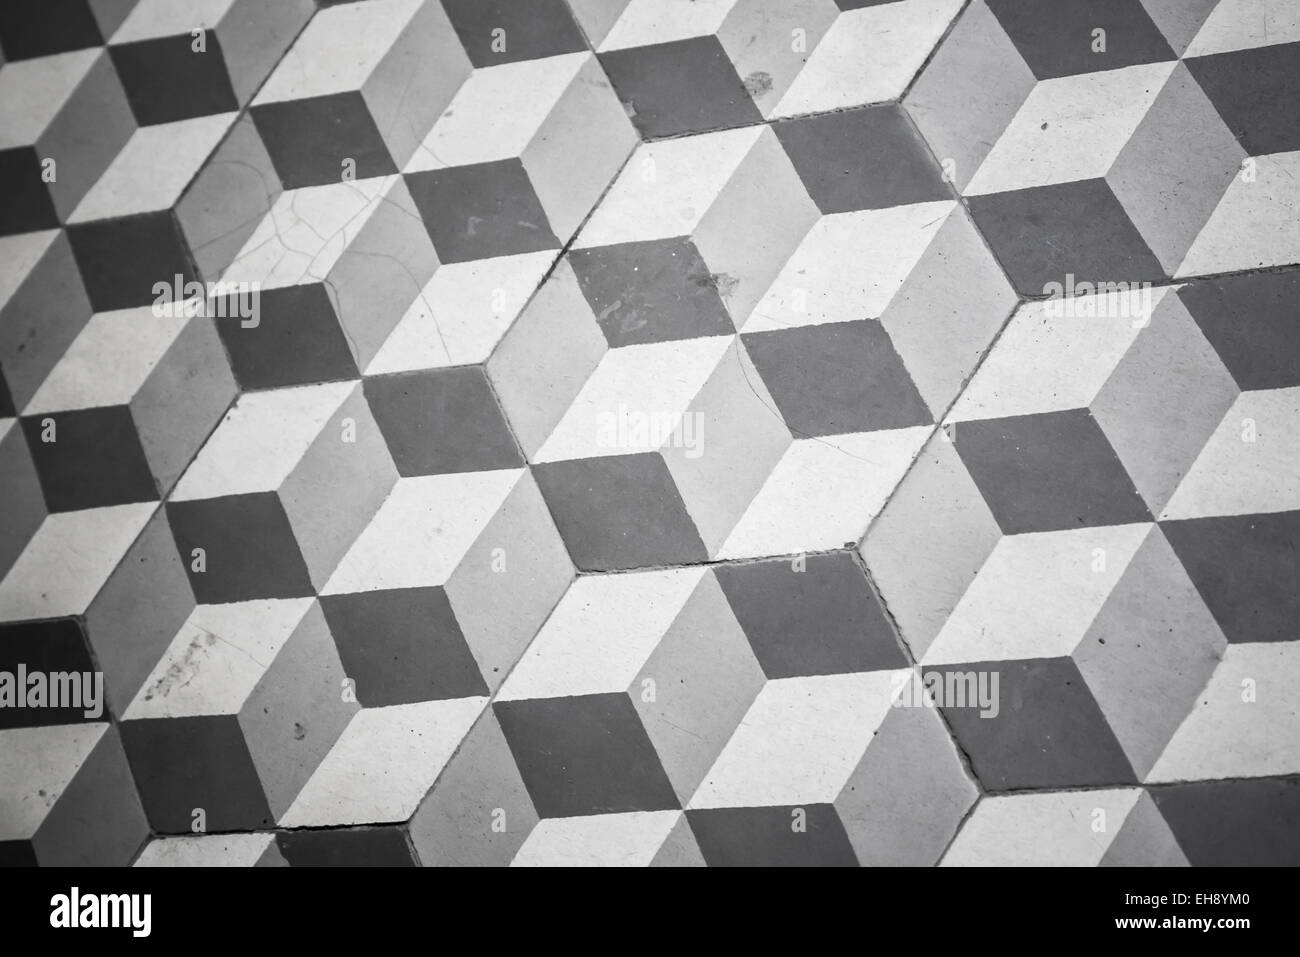 Old black and white tiling on the floor, cubic pattern Stock Photo